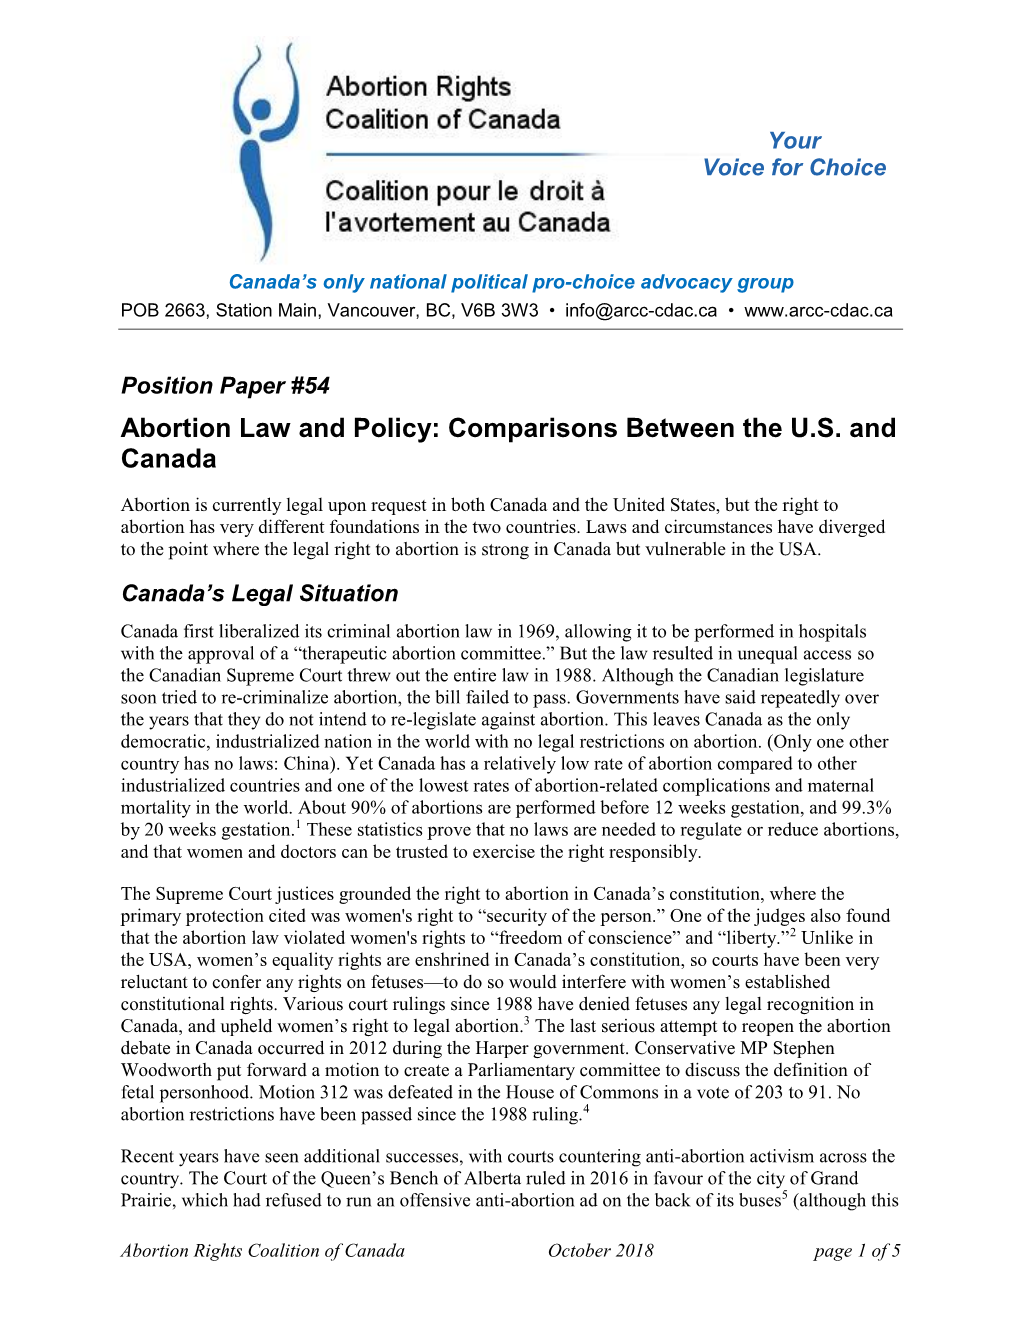 Abortion Law and Policy: Comparisons Between the U.S. and Canada